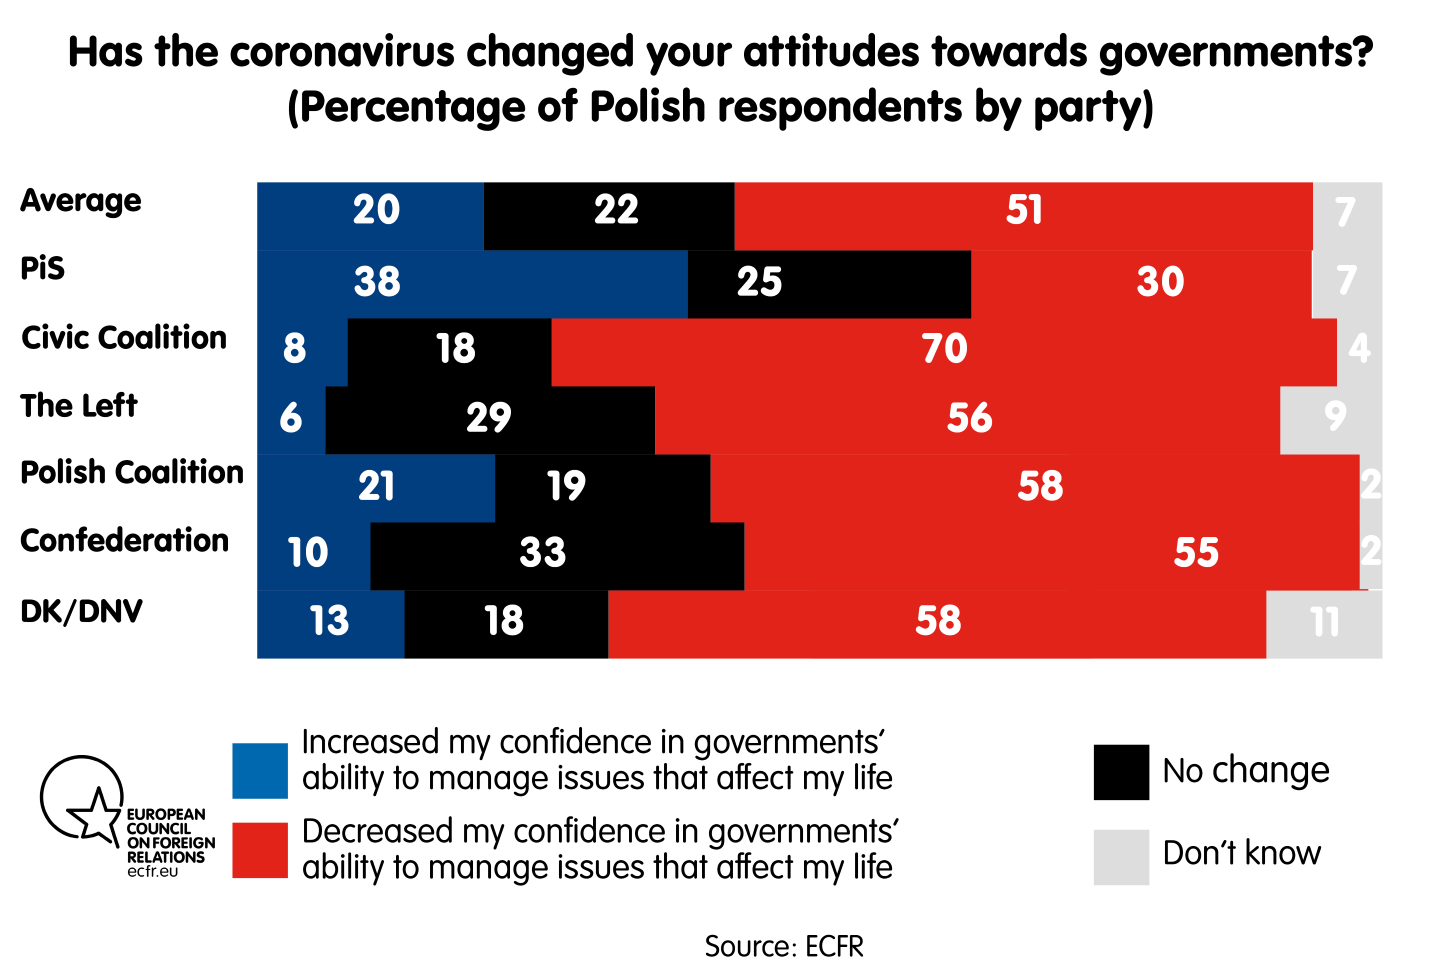 Has the coronavirus changed your attitudes towards governments? By party